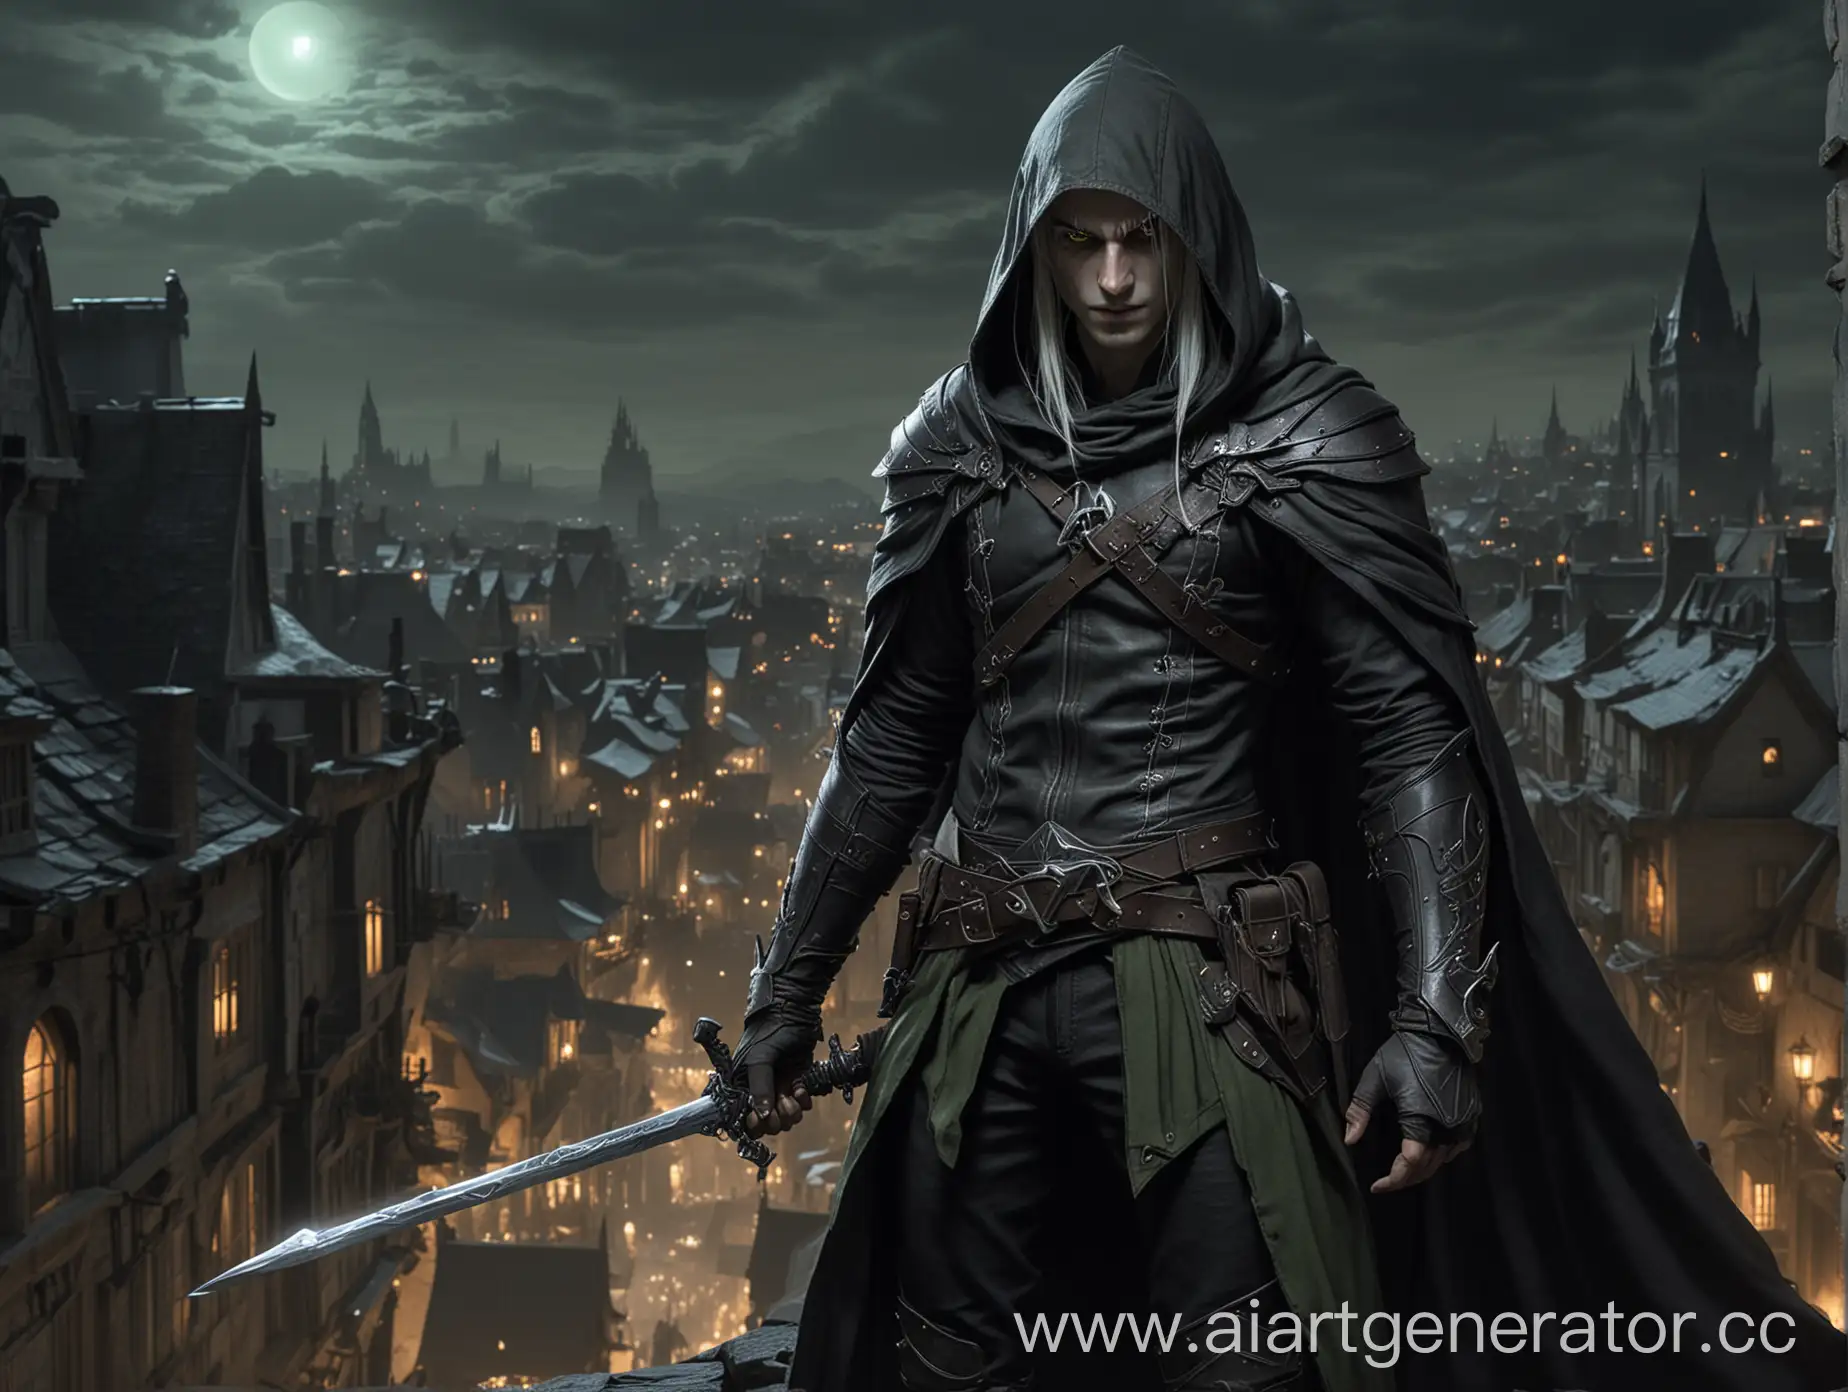 Mysterious-Dark-Elf-Rogue-Overlooking-Cityscape-at-Night